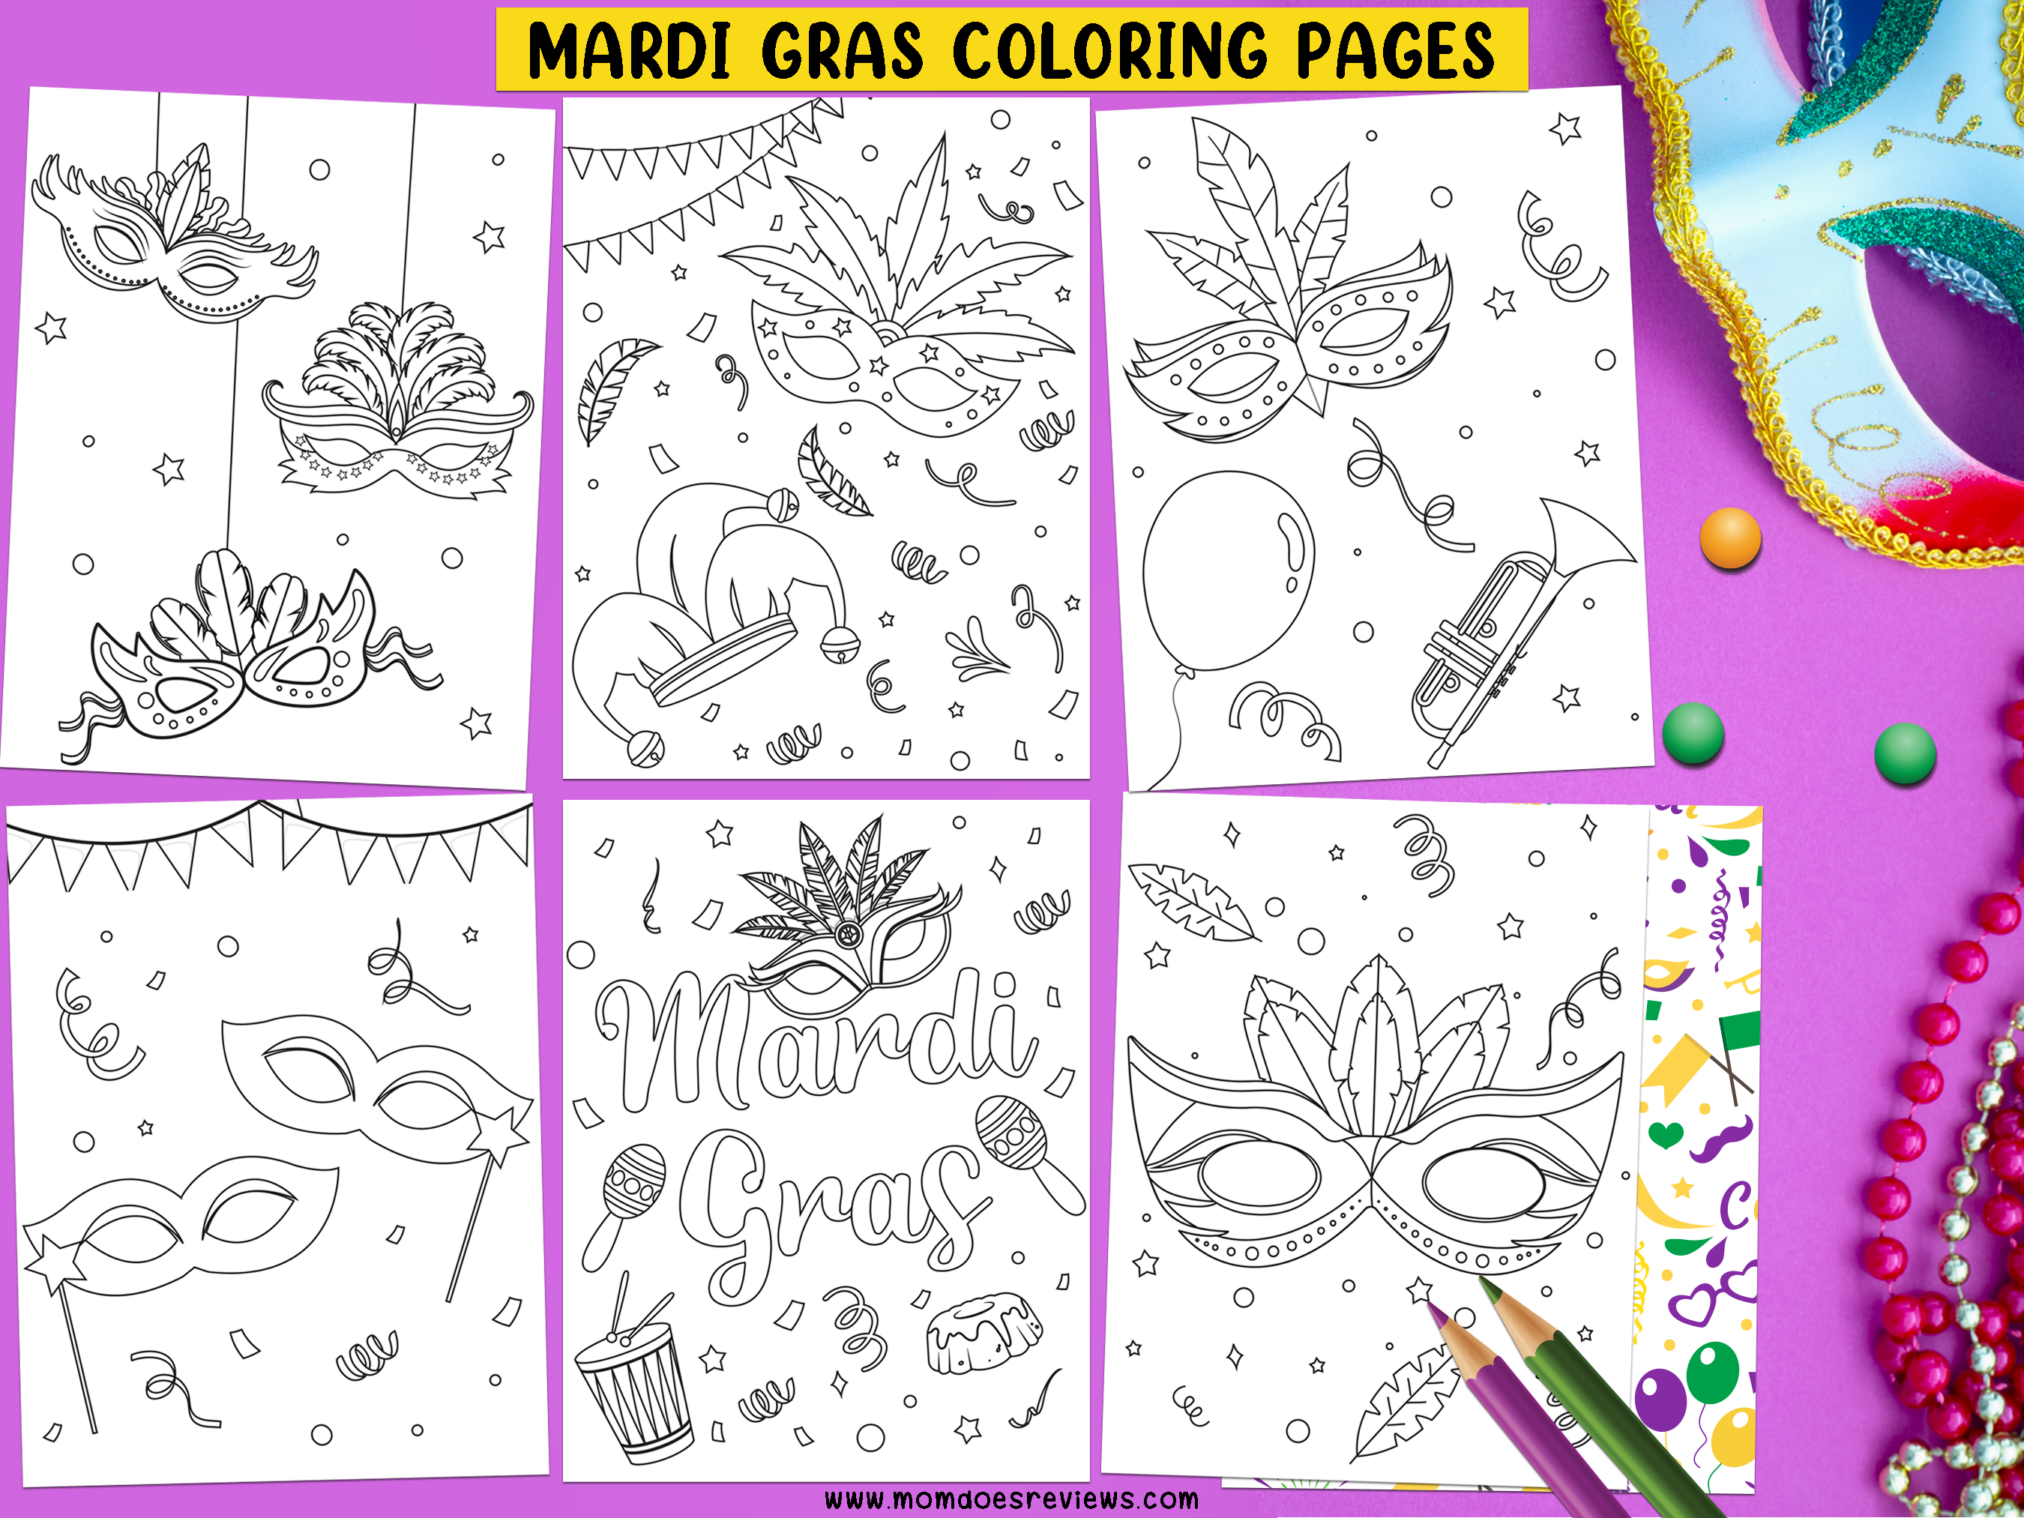 Celebrate with Mardi Gras Coloring Pages